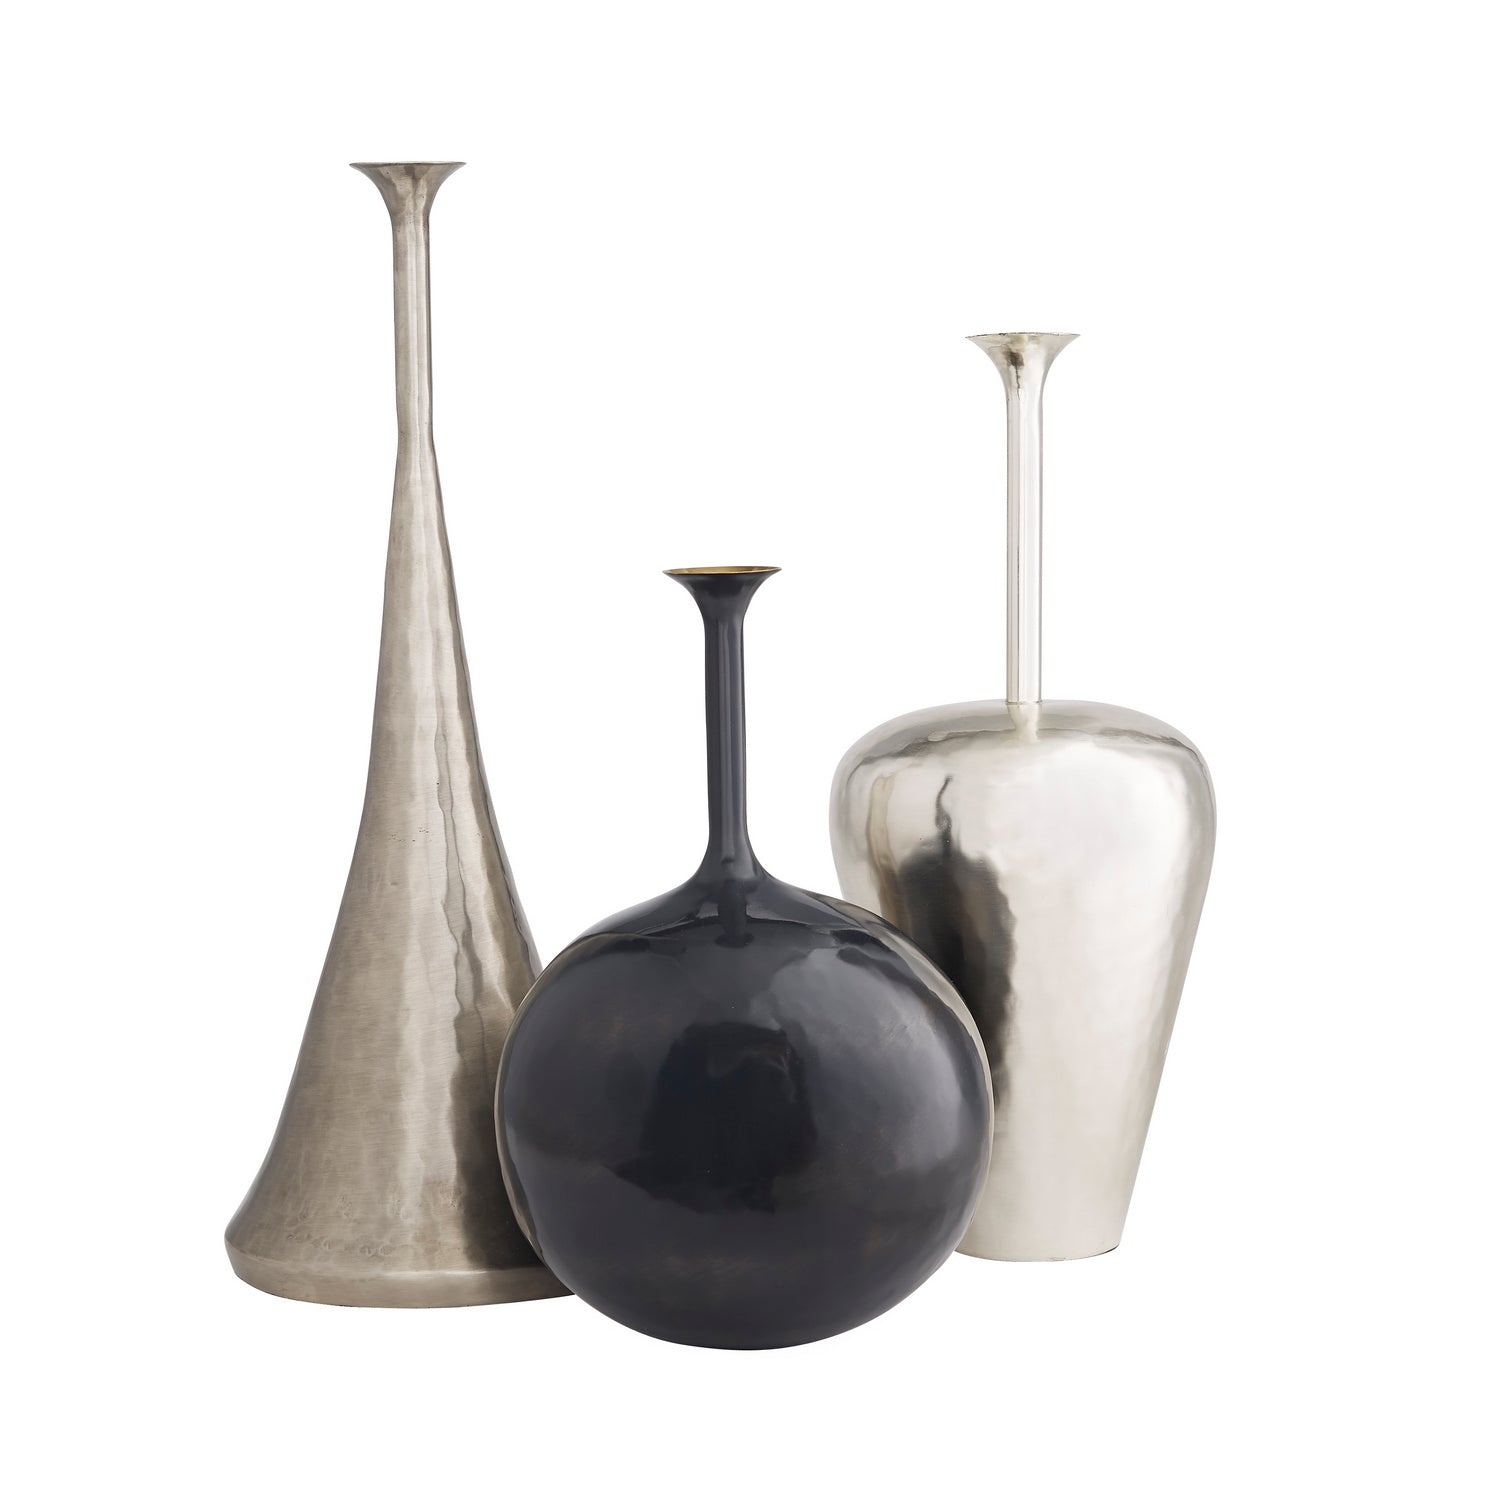 Vases, Set of 3 from the Gyles collection in Polished Nickel finish